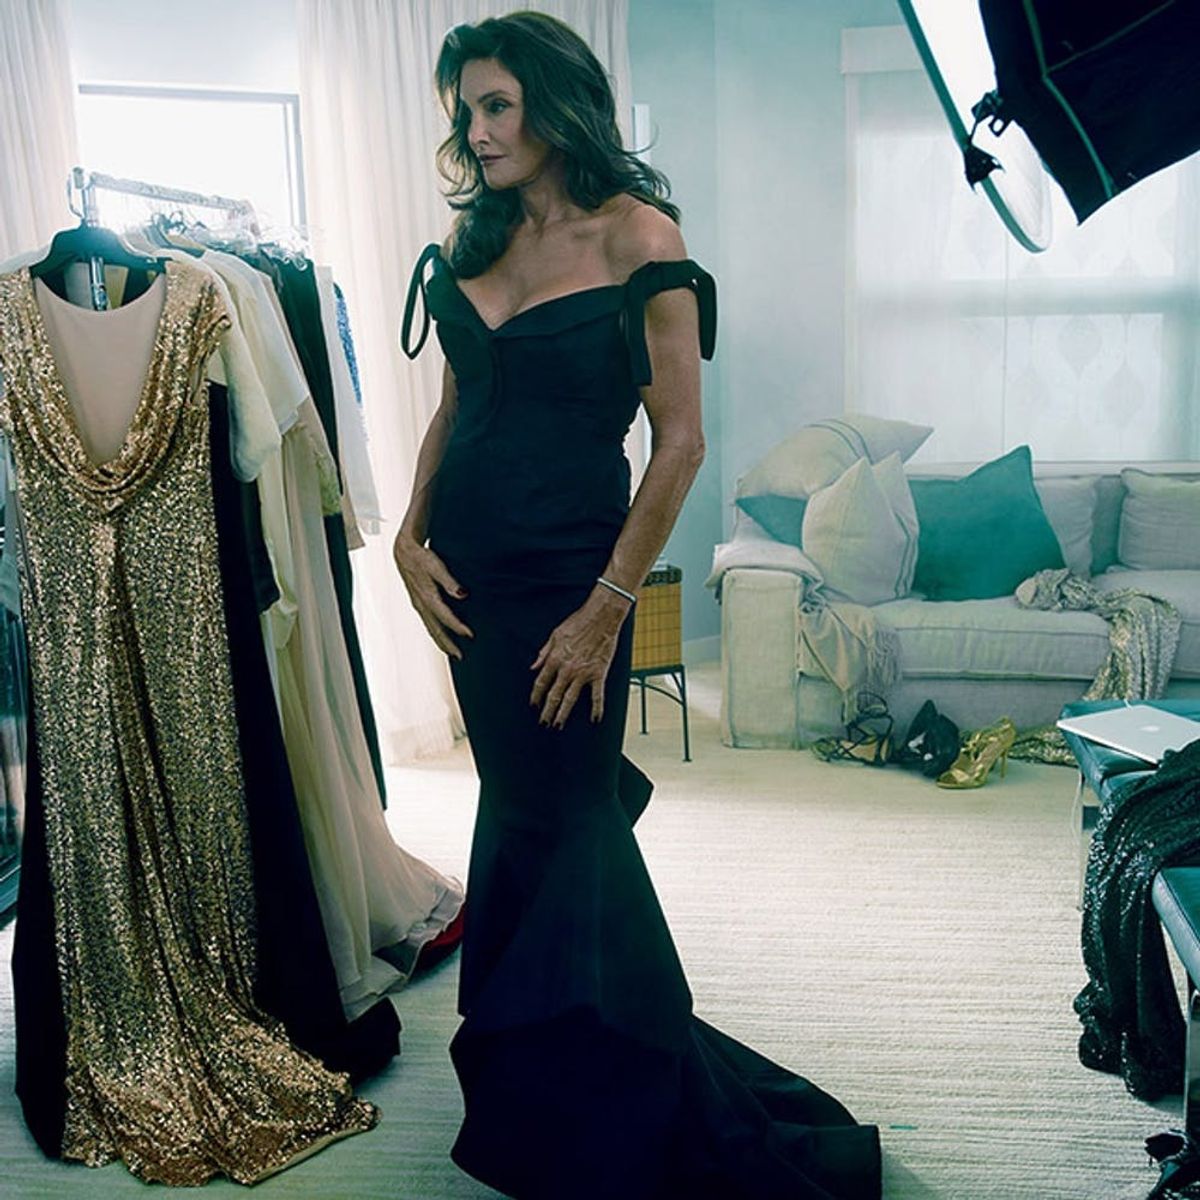 You Have to See Caitlyn Jenner’s First I Am Cait Promo Photo